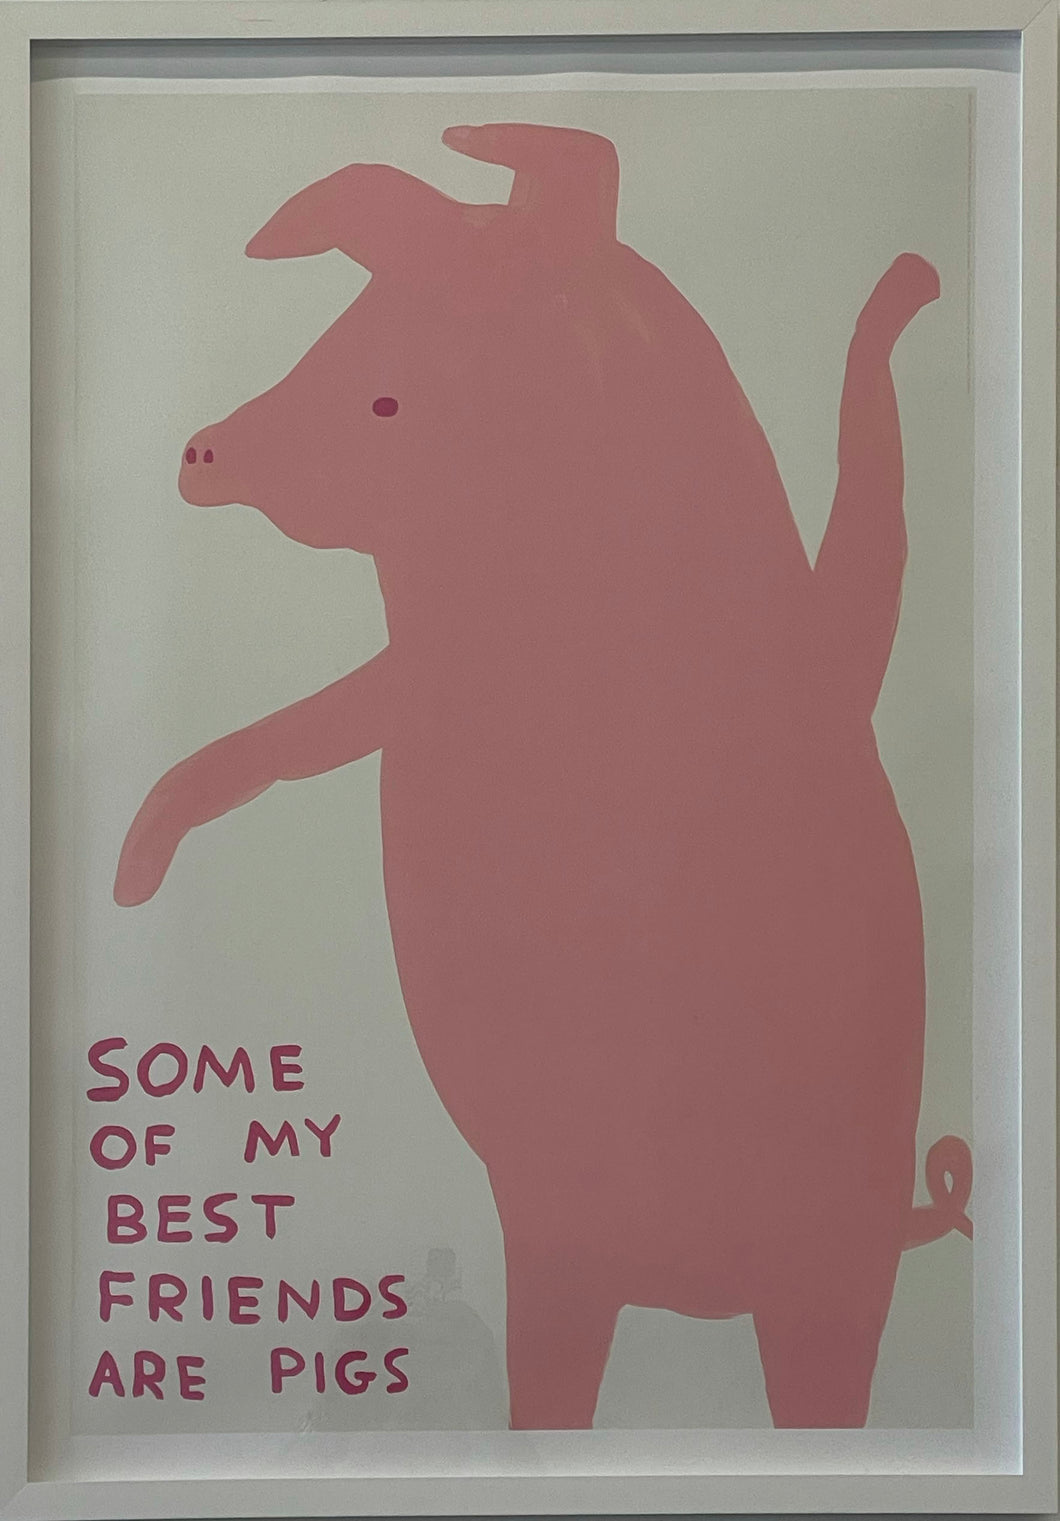 David Shrigley 'Some Of My Best Friends Are Pigs'